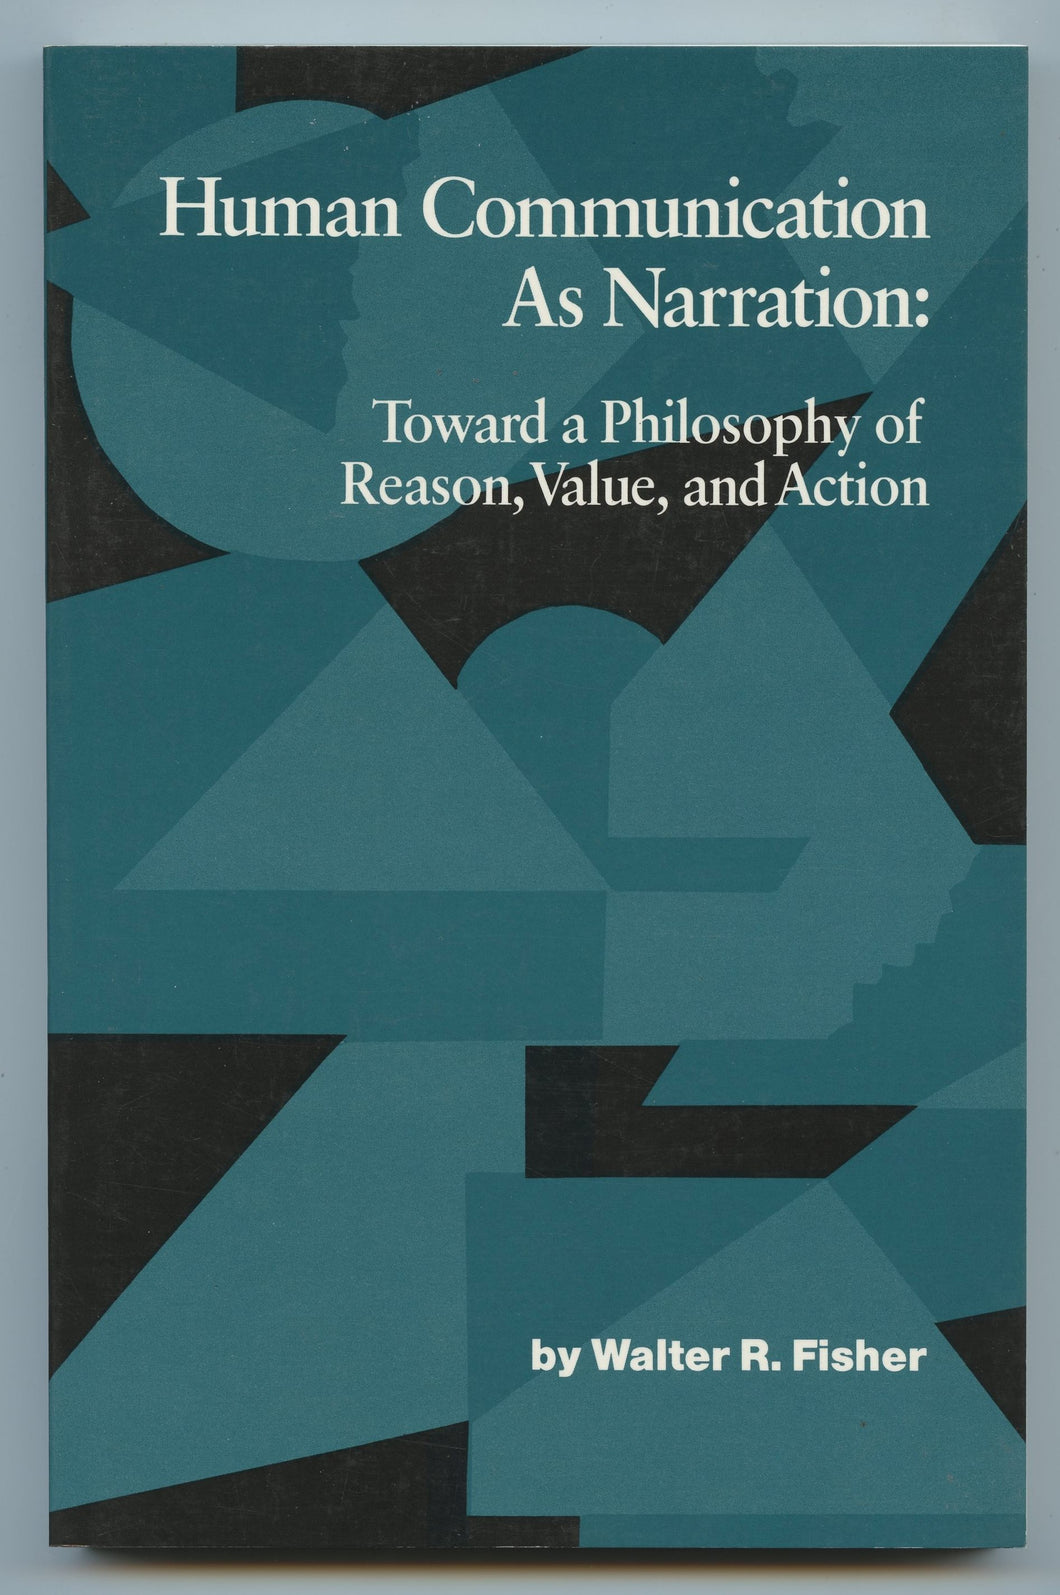 Human Communication As Narration: Toward a Philosophy of Reason, Value, and Action